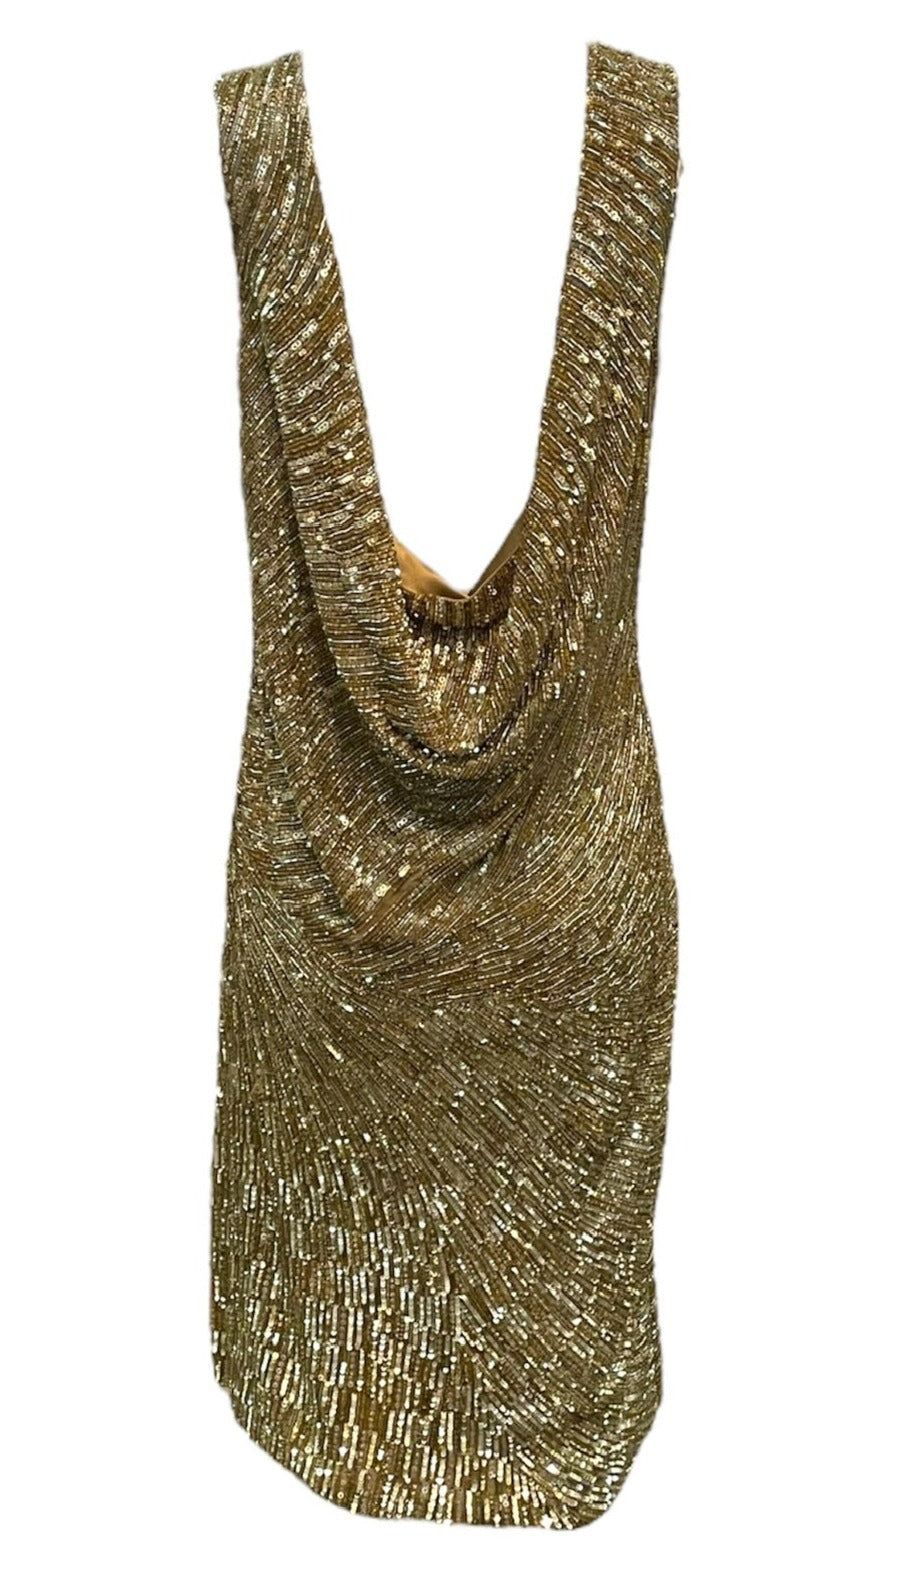 Monica Lhuillier 2000s Gold Sequin Beaded Cocktail Dress BACK 2 of 5